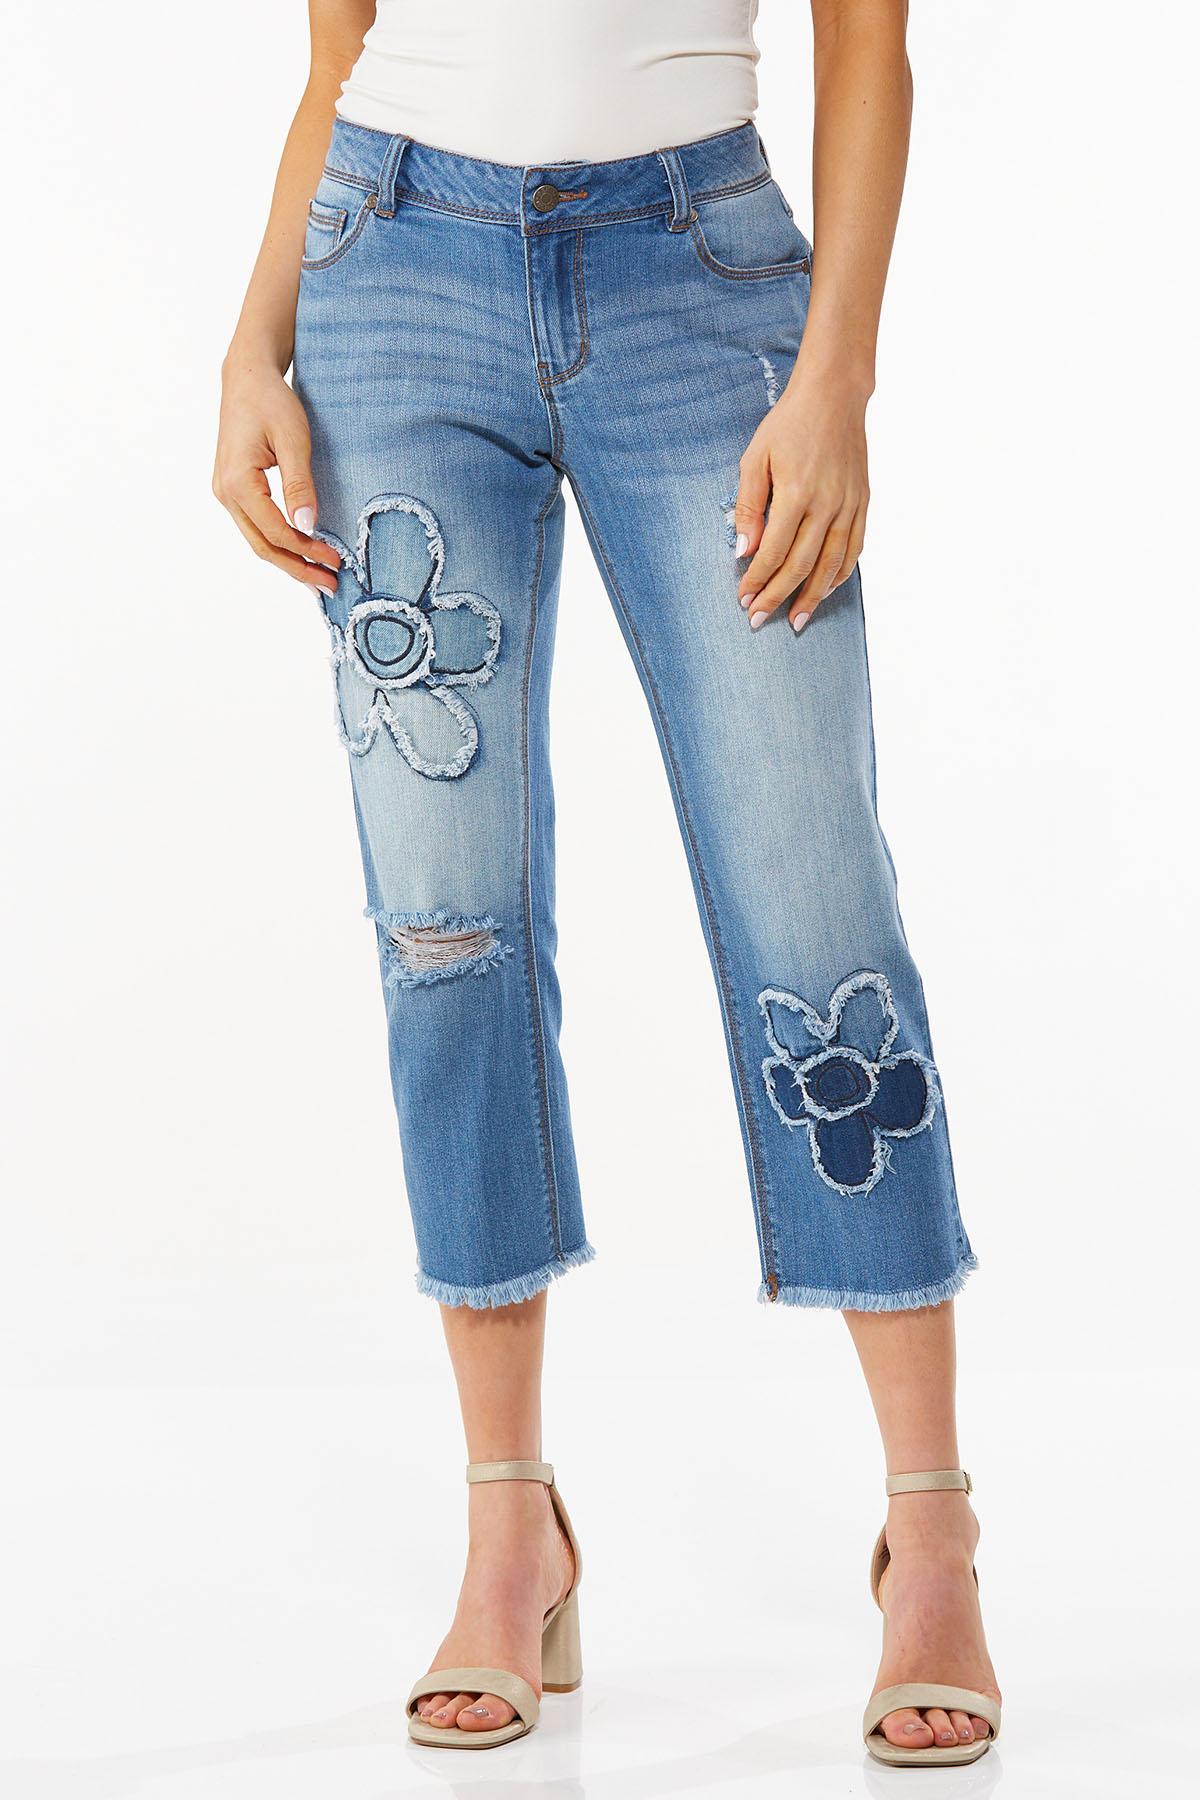 Distressed Flower Jeans